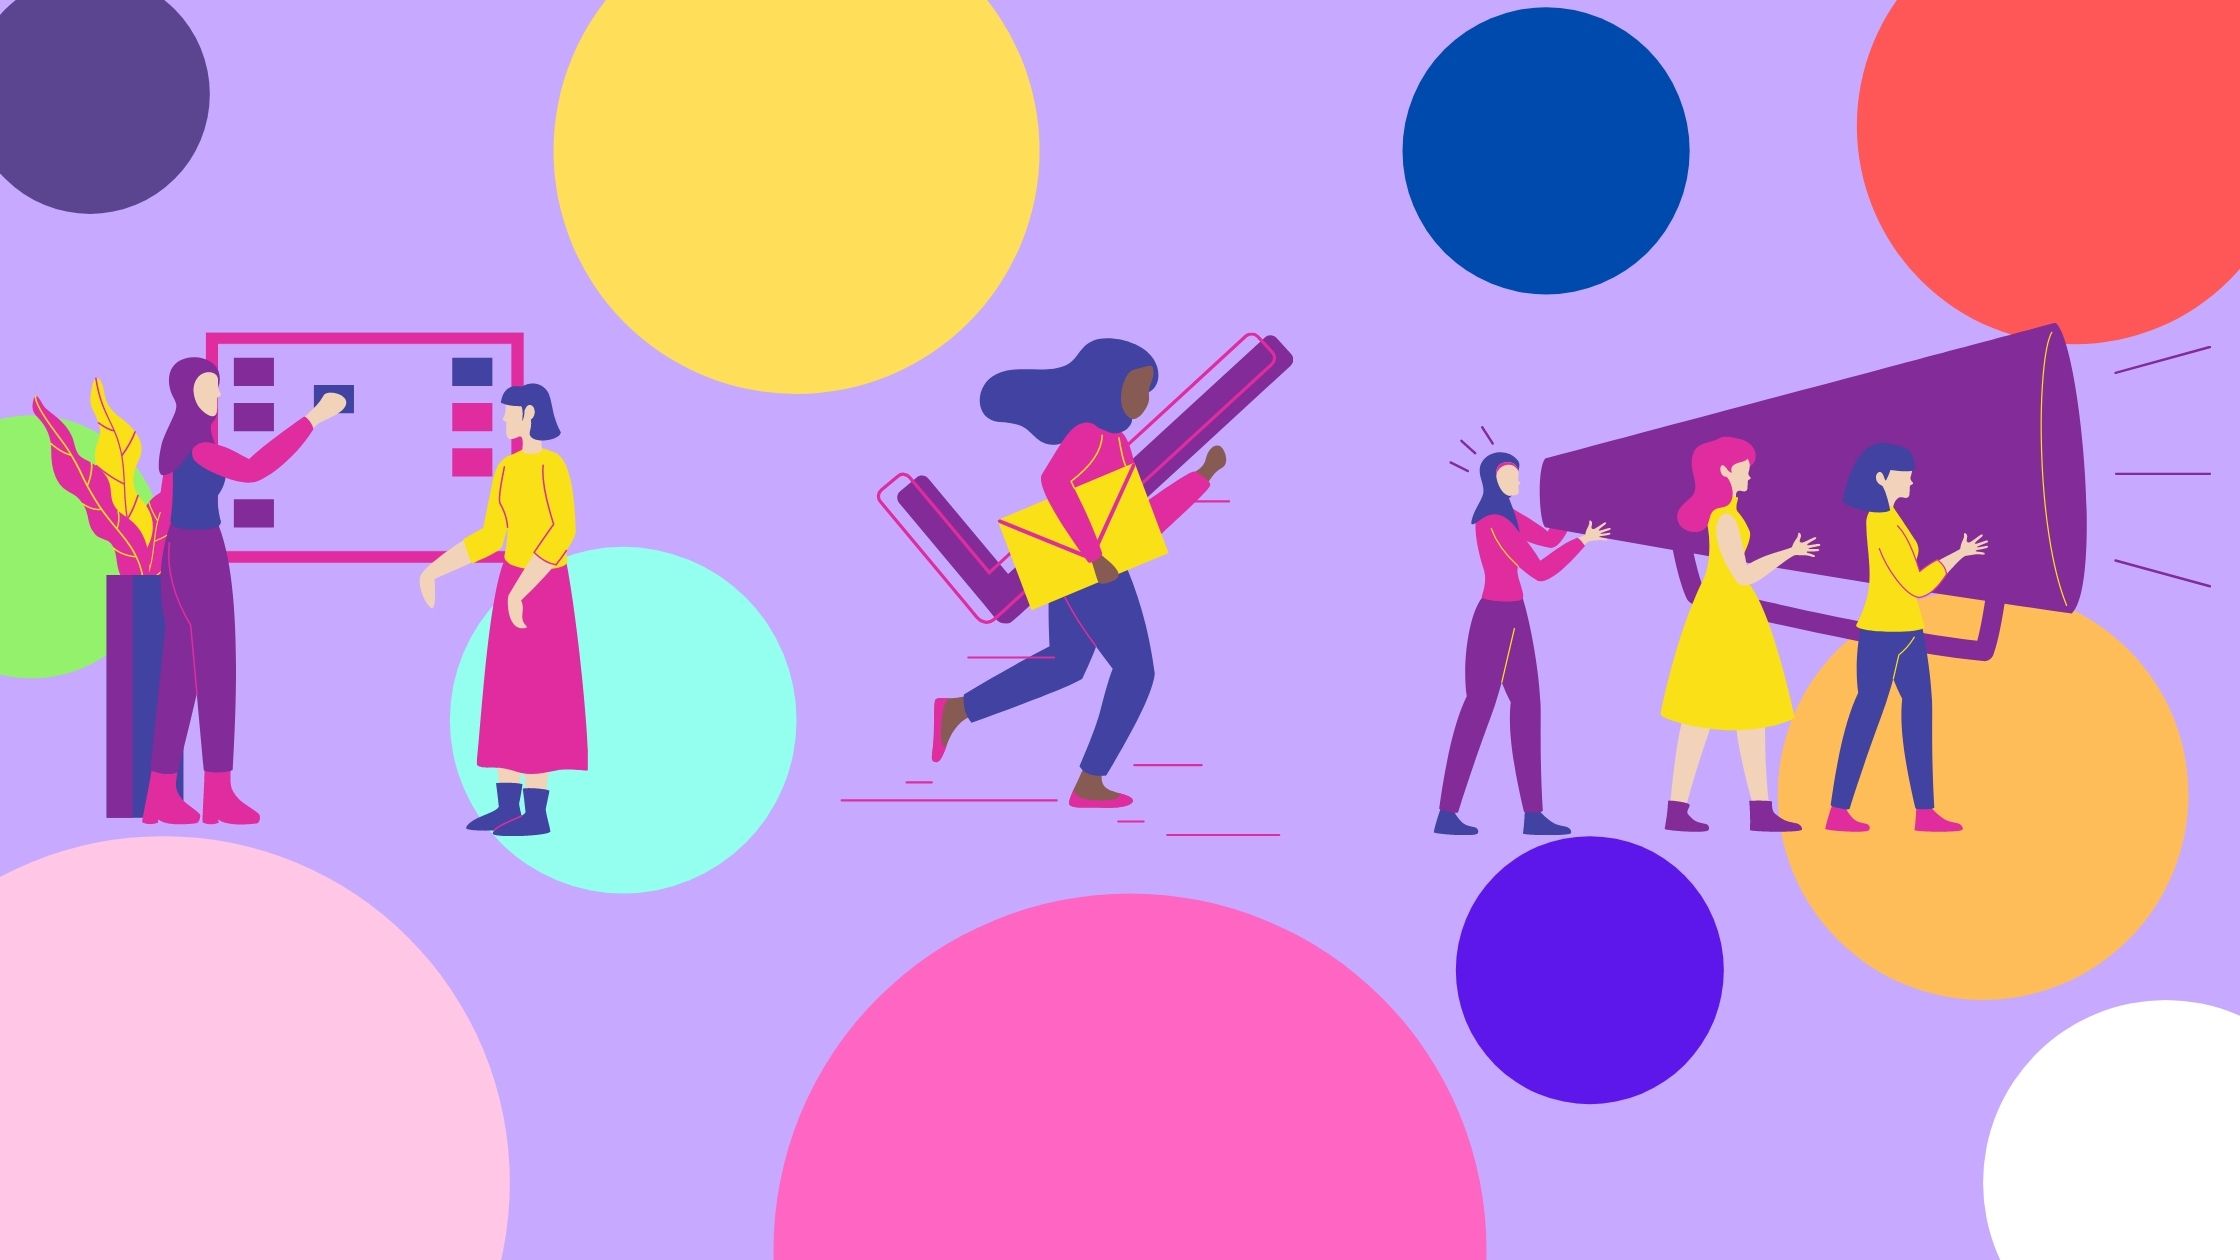 Purple background with multicolored (dark purple, blue, green, white, yellow, orange, red, and pink) polka dots floating around. In the center are three images of women learning/organizing their plans, voting, and being activists for their cause.